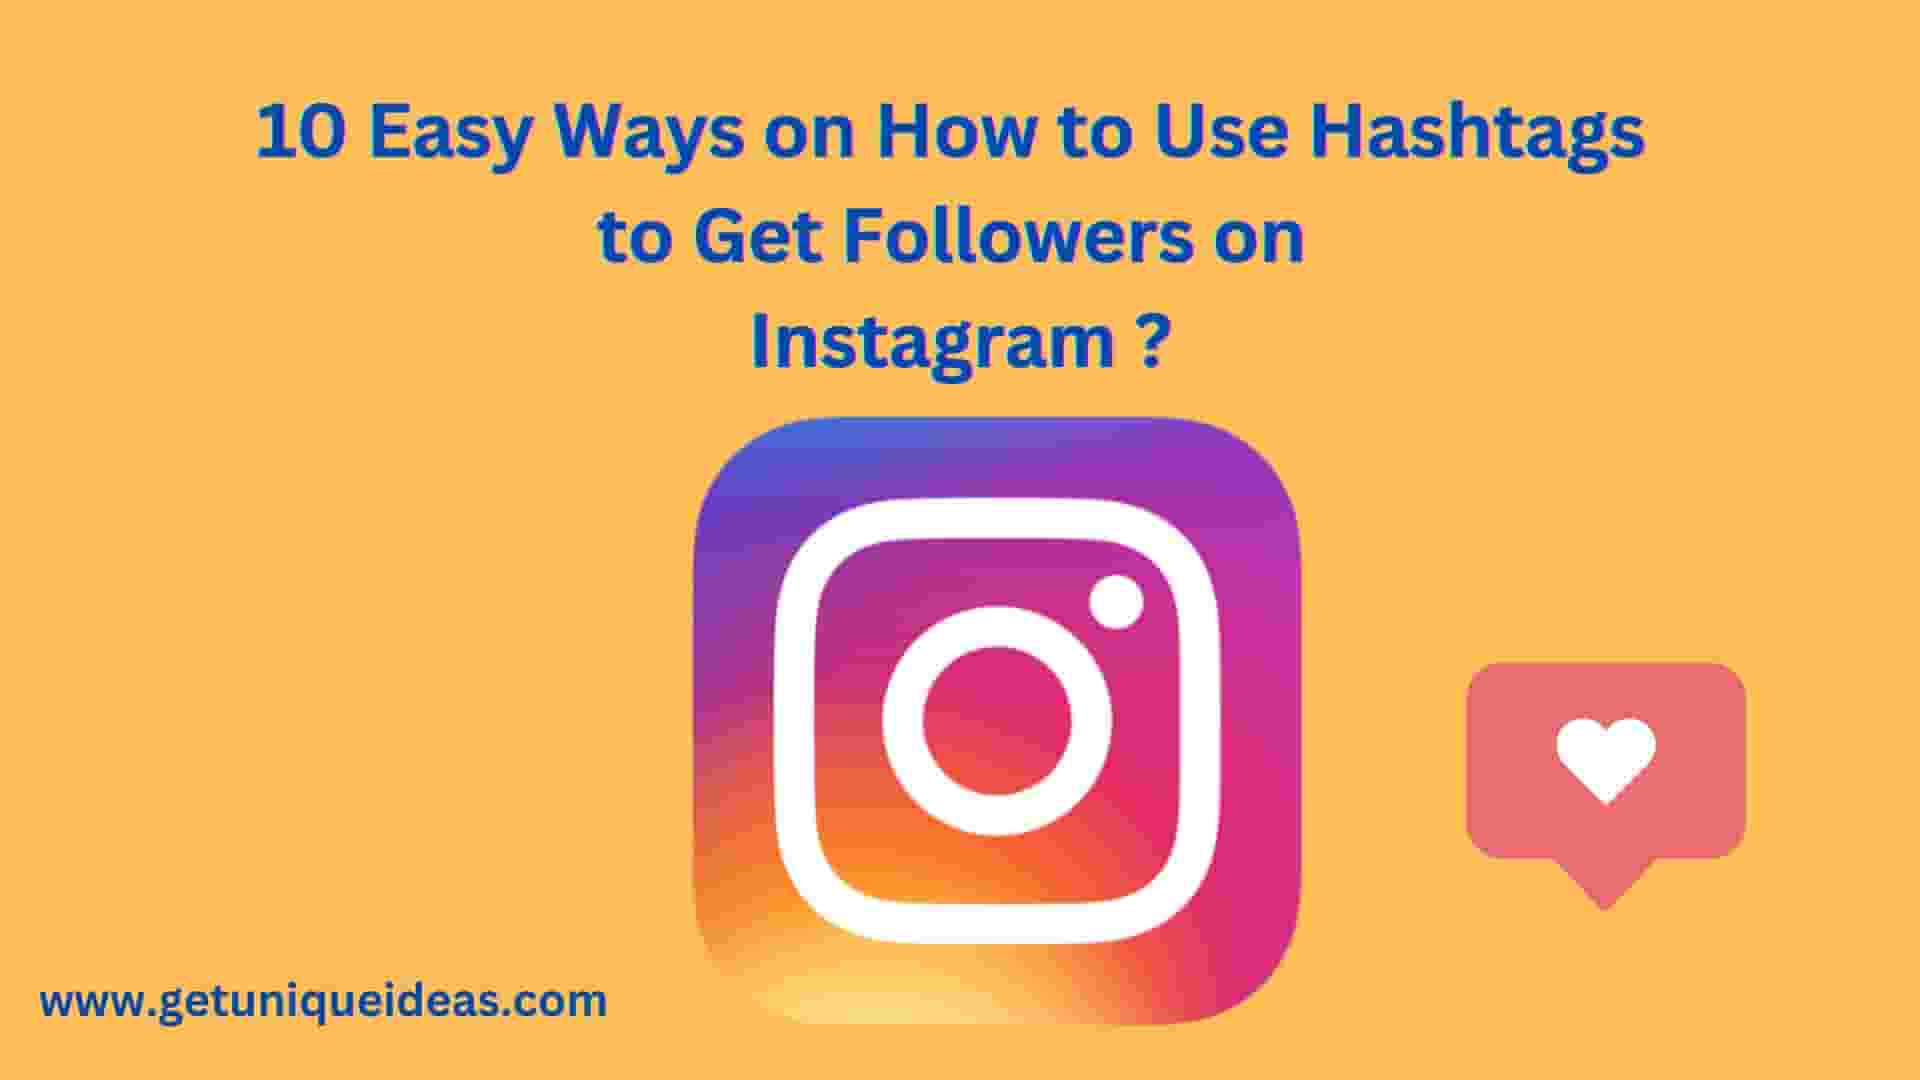 How to Use Hashtags to Get Followers on Instagram